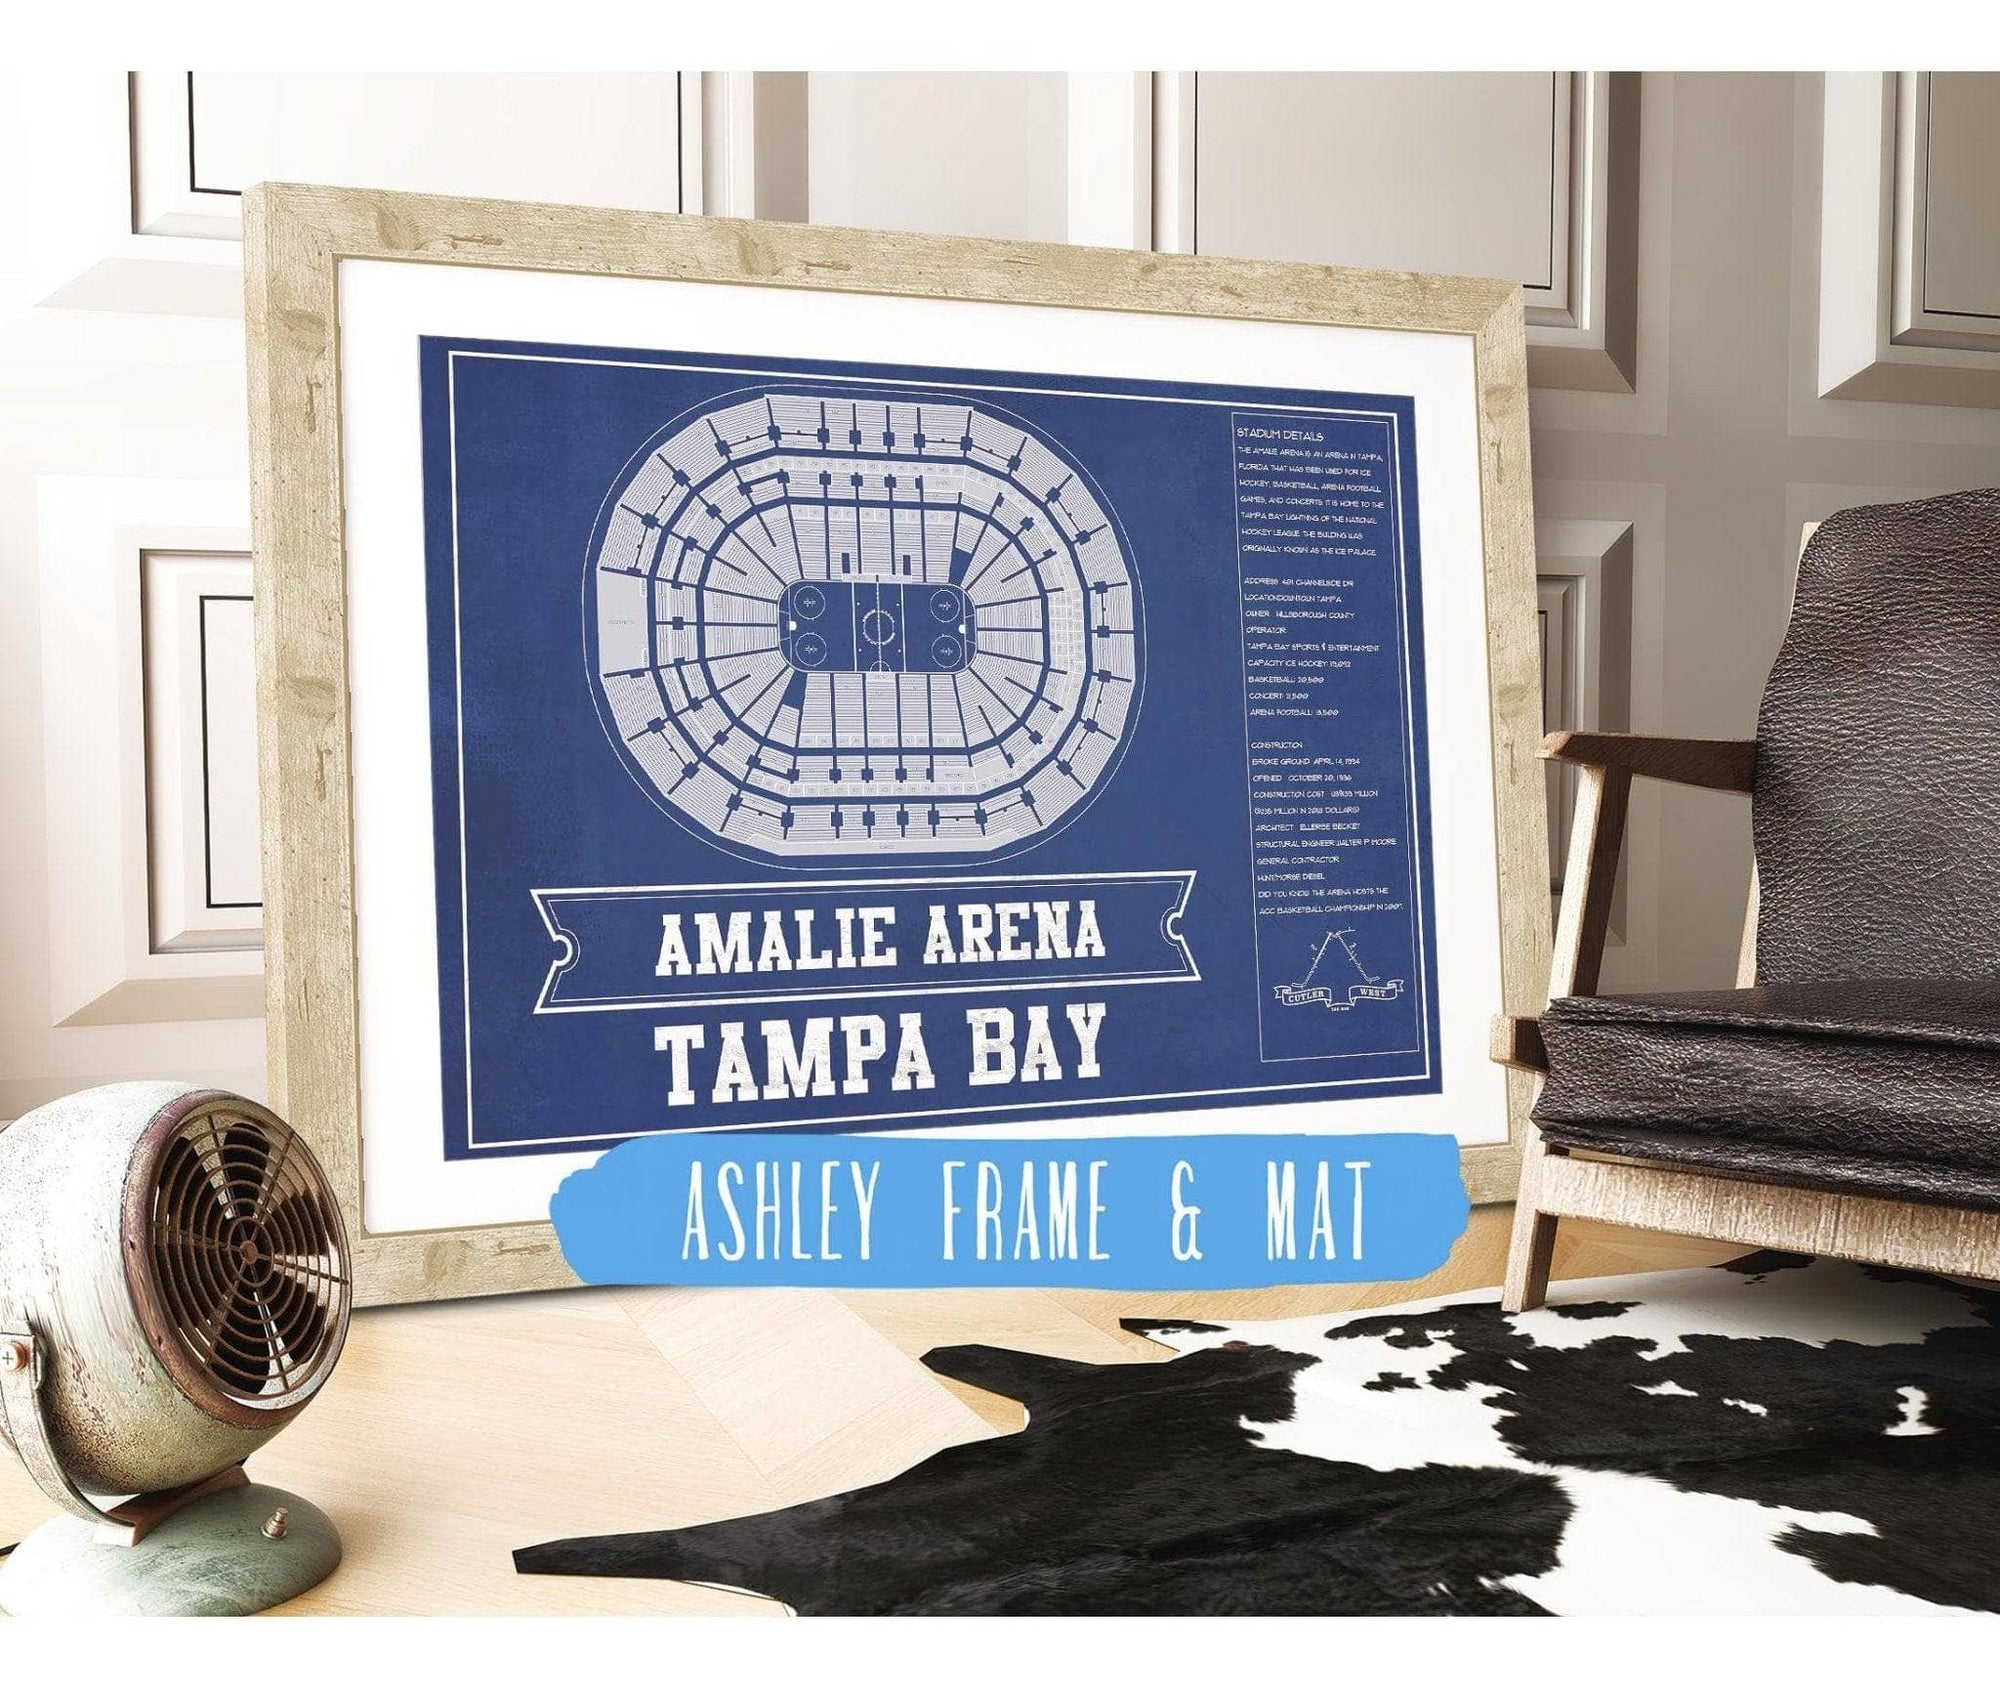 Amalie Arena Tickets, Seating Charts and Schedule in Tampa FL at StubPass!